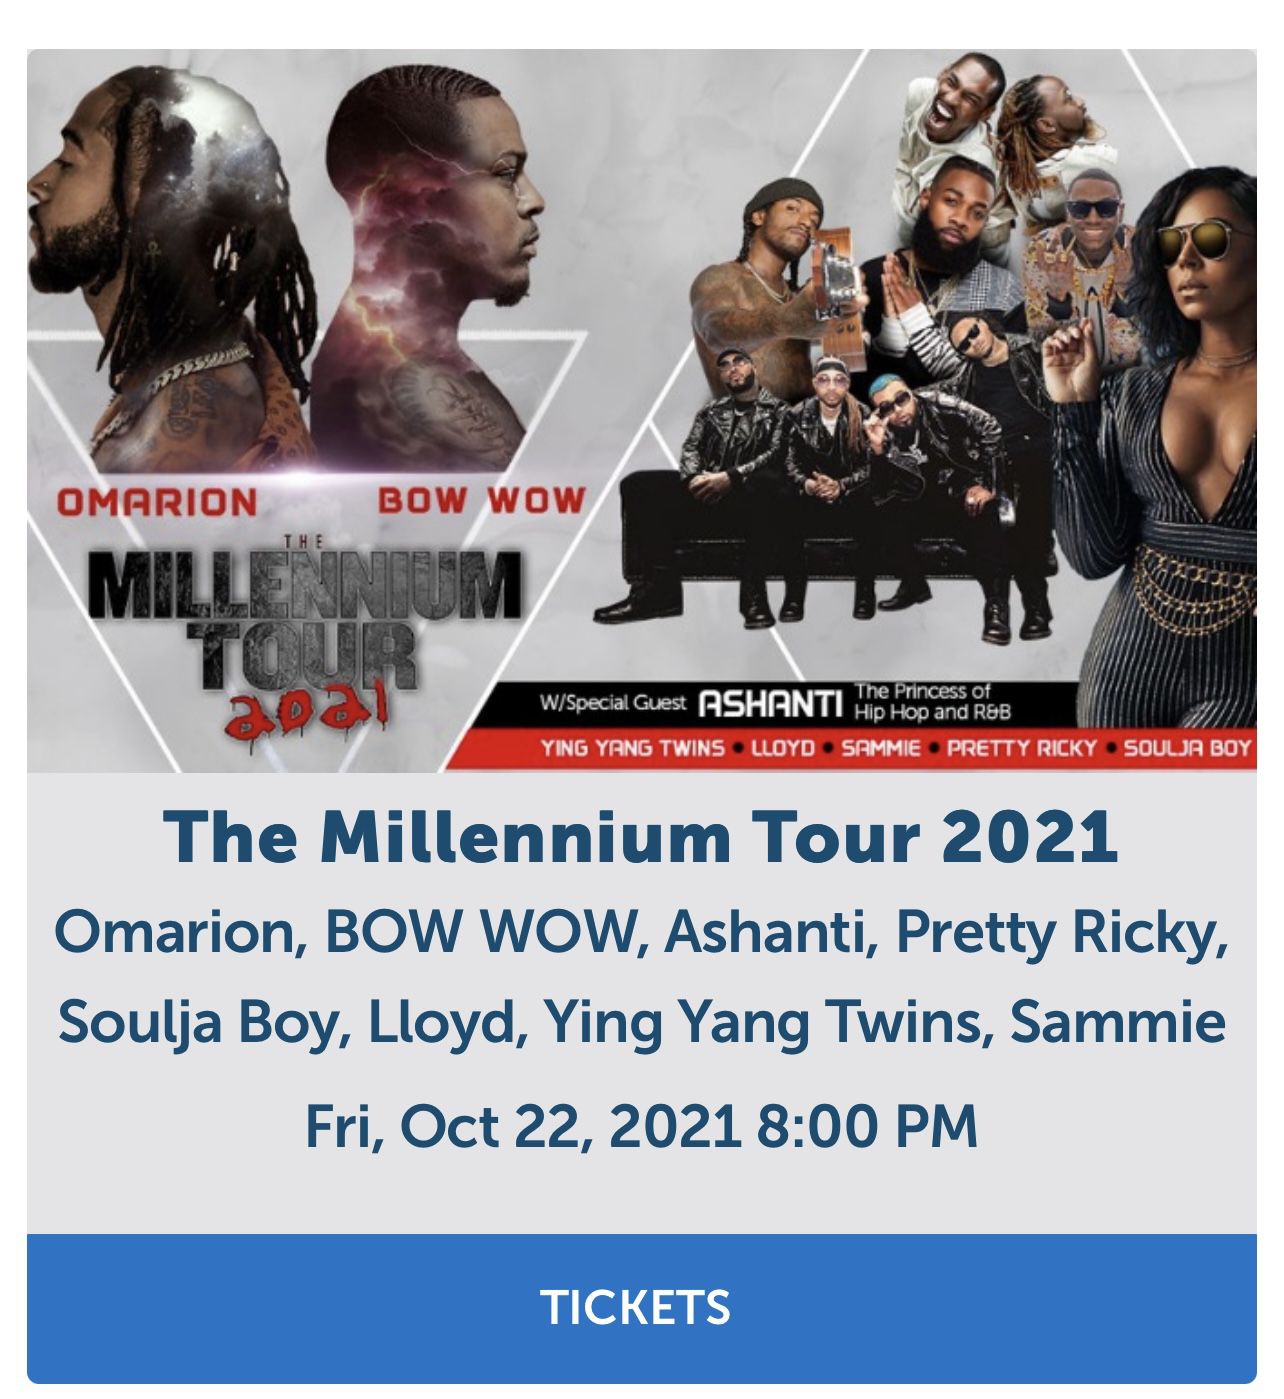 Millennium Tour Seats Friday 10/22 - WILLING TO DISCOUNT 